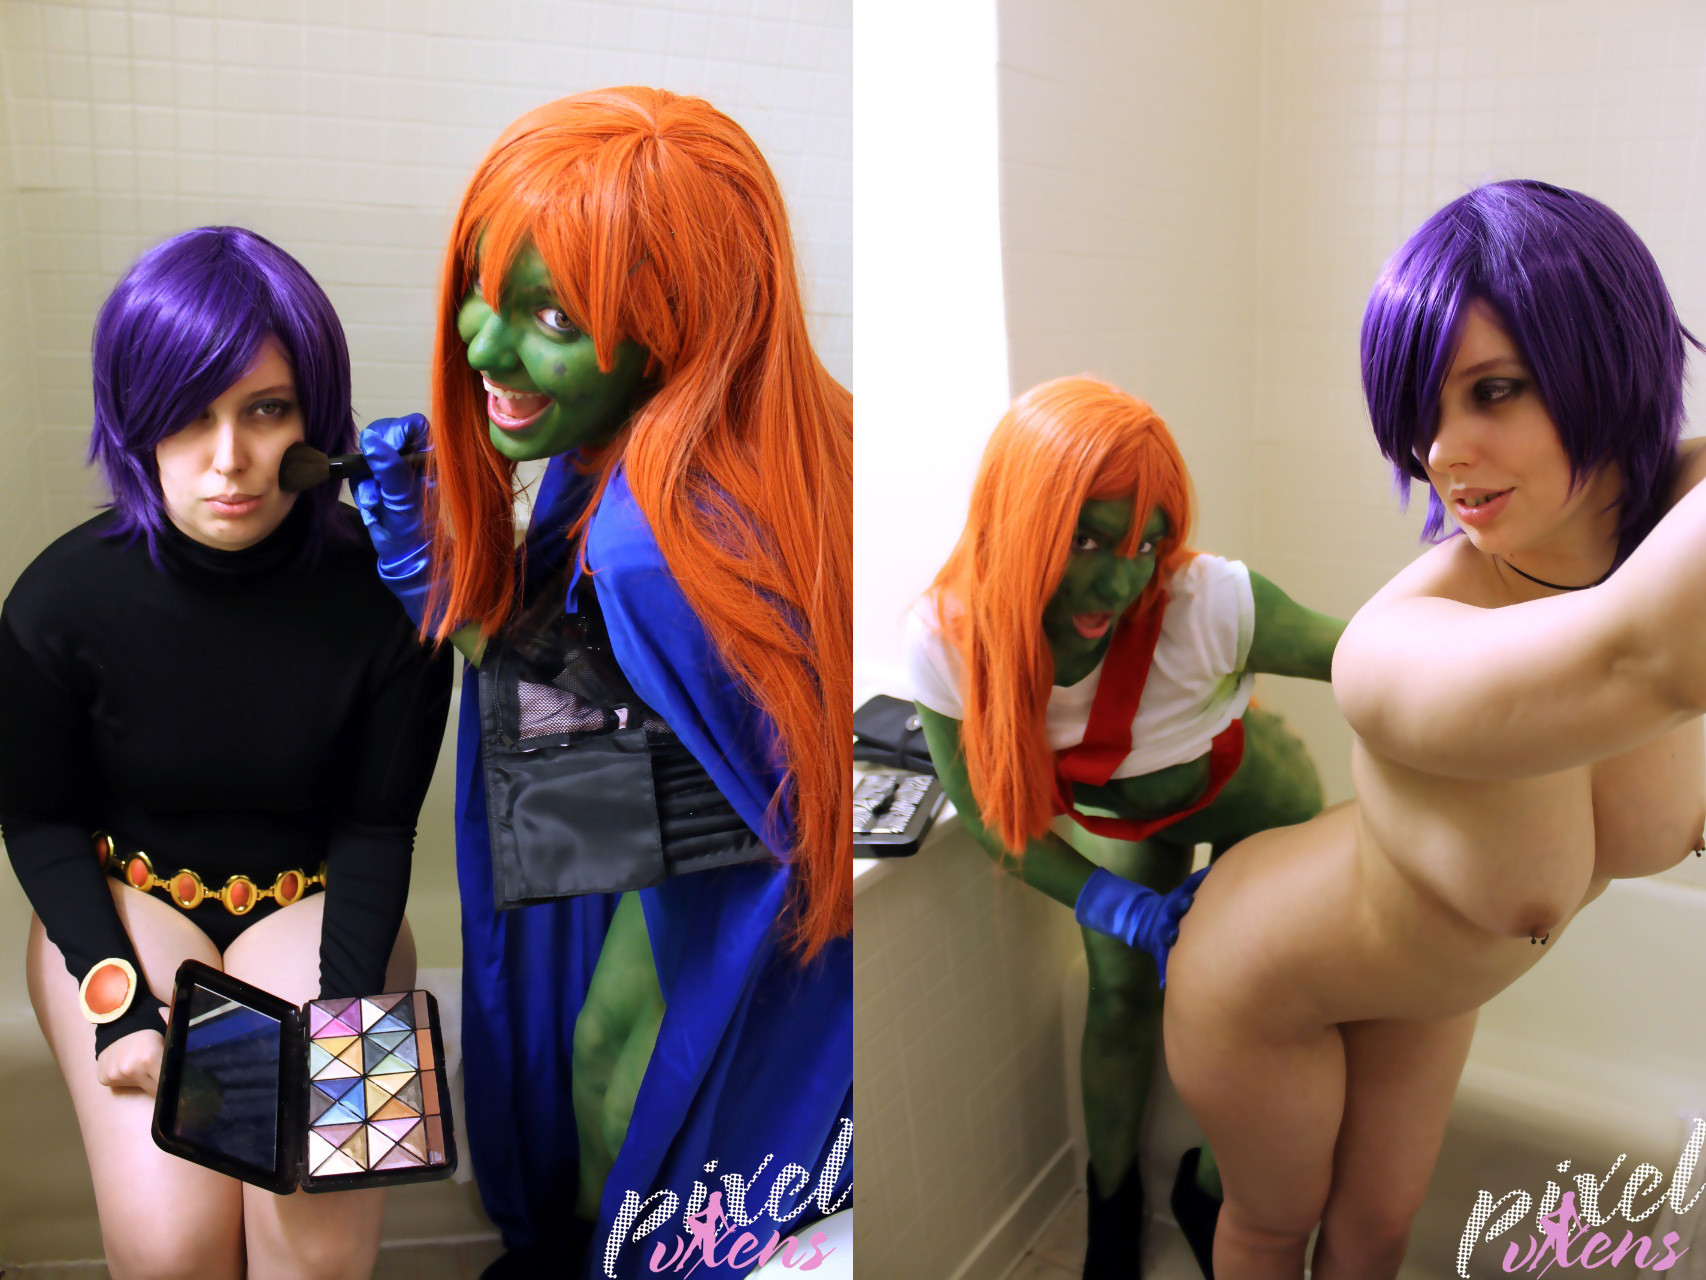 Miss martian naked